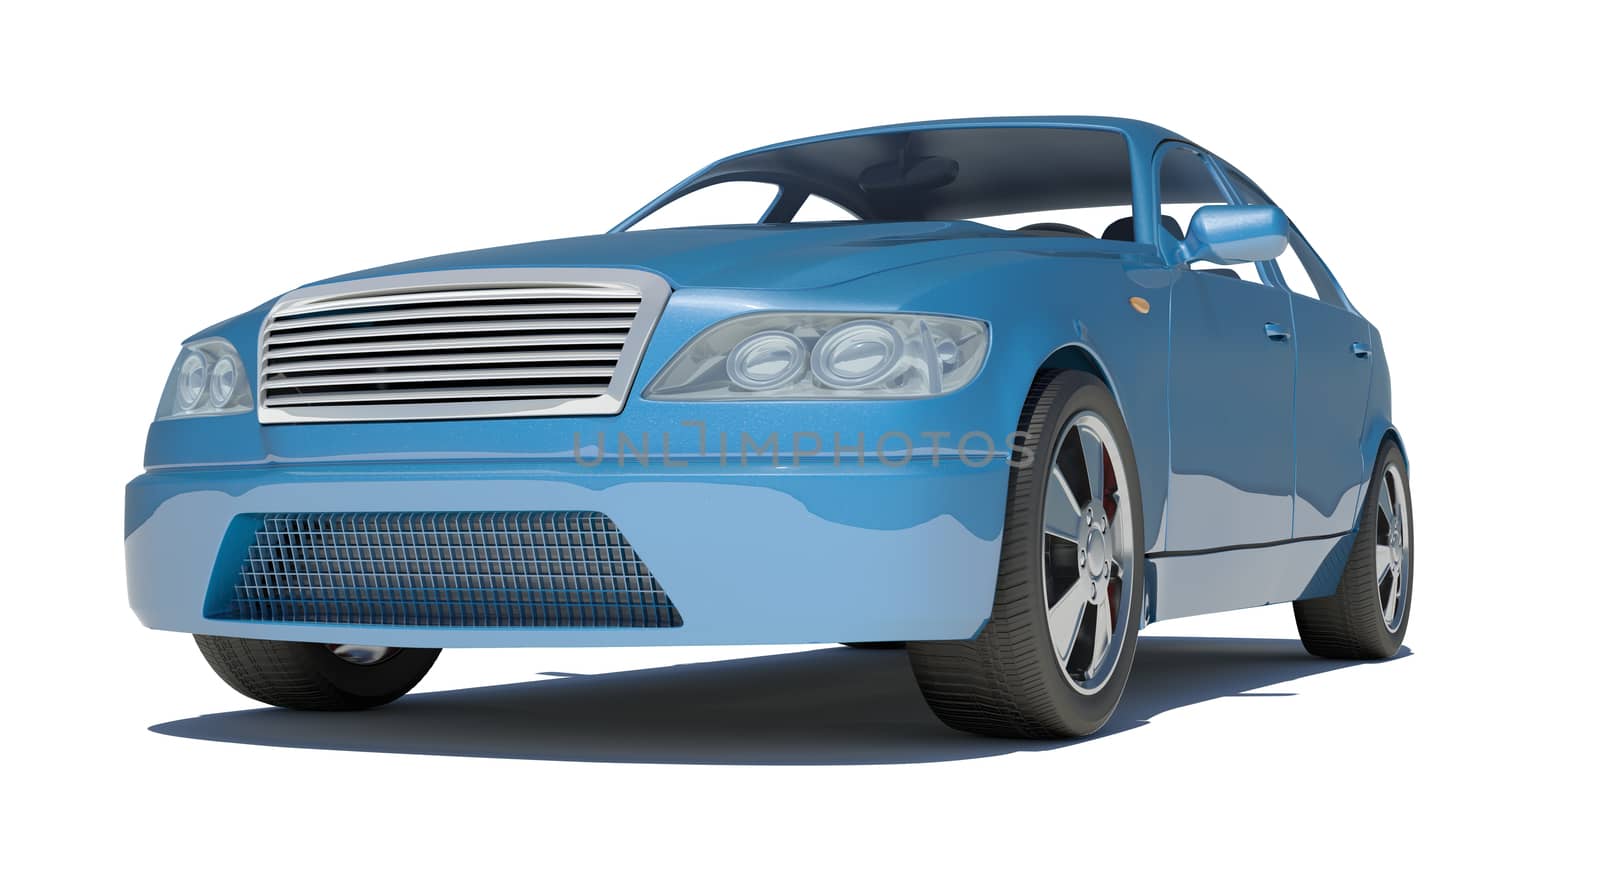 Blue car on isolated white background, side view